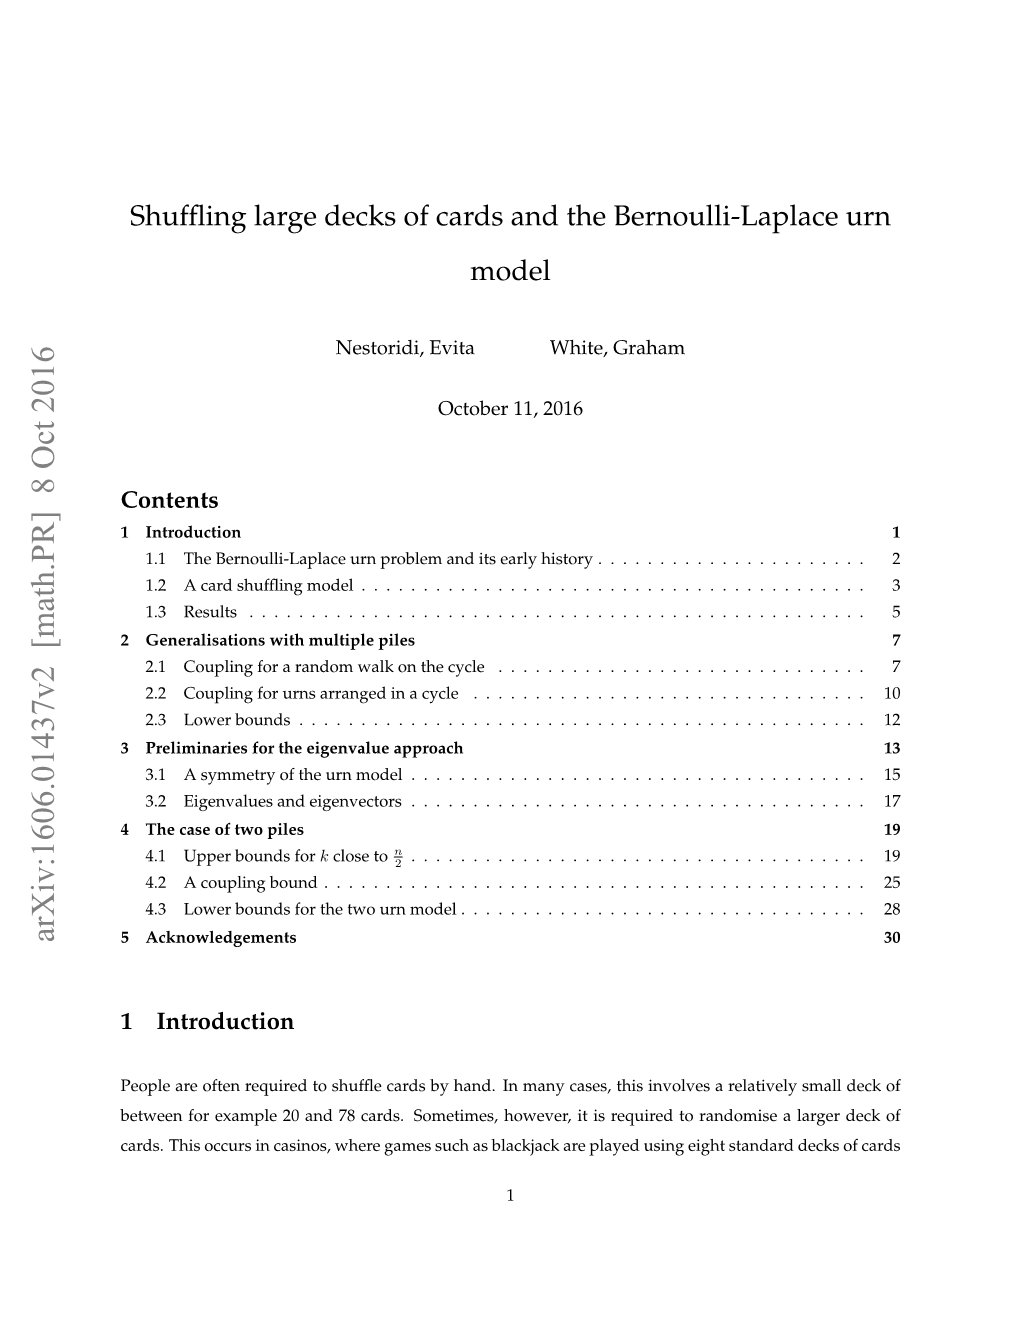 Shuffling Large Decks of Cards and the Bernoulli-Laplace Urn Model